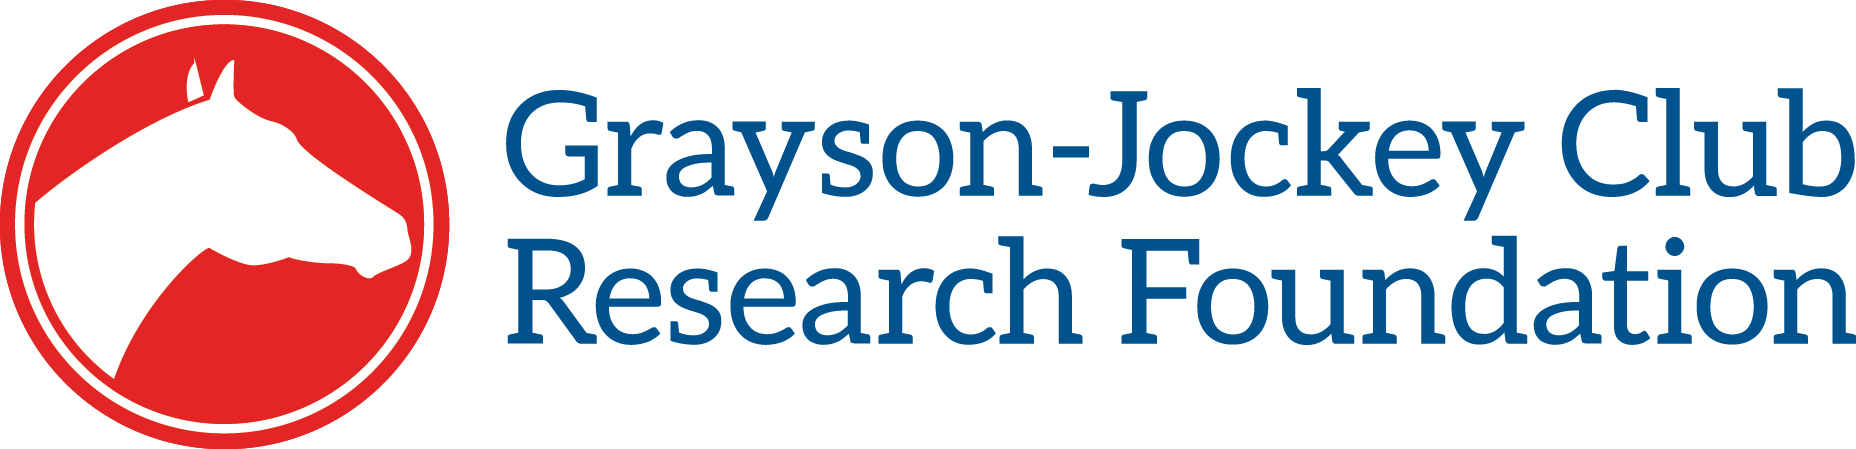 Featured image for “Grayson Jockey Club Research Foundation”